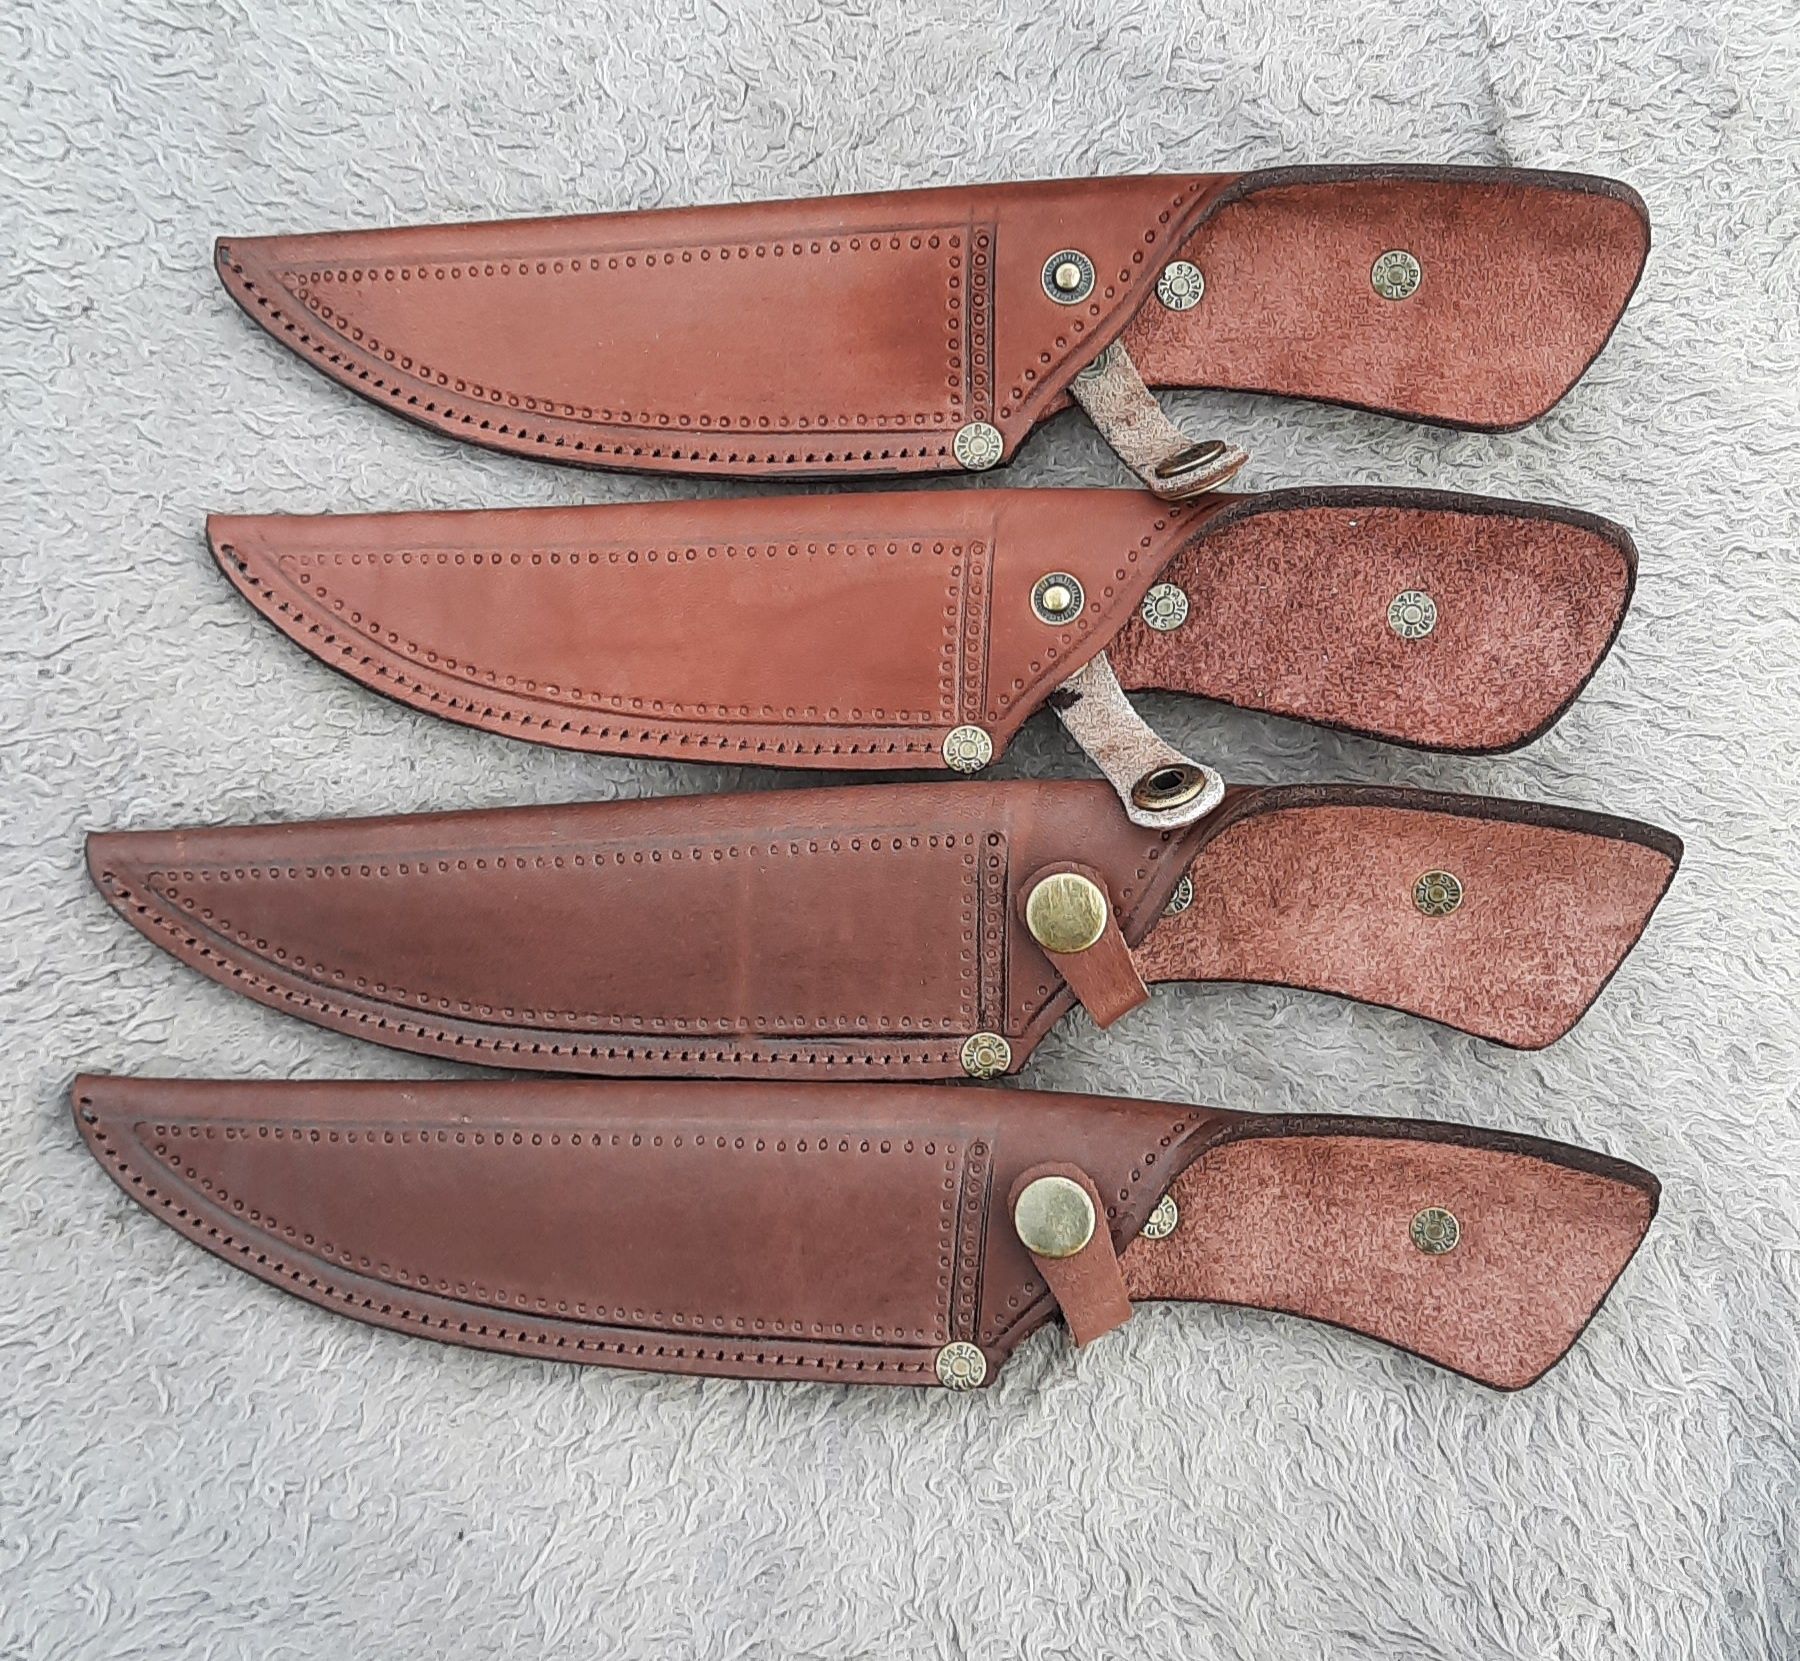 Stamping Leather Knife Sheath